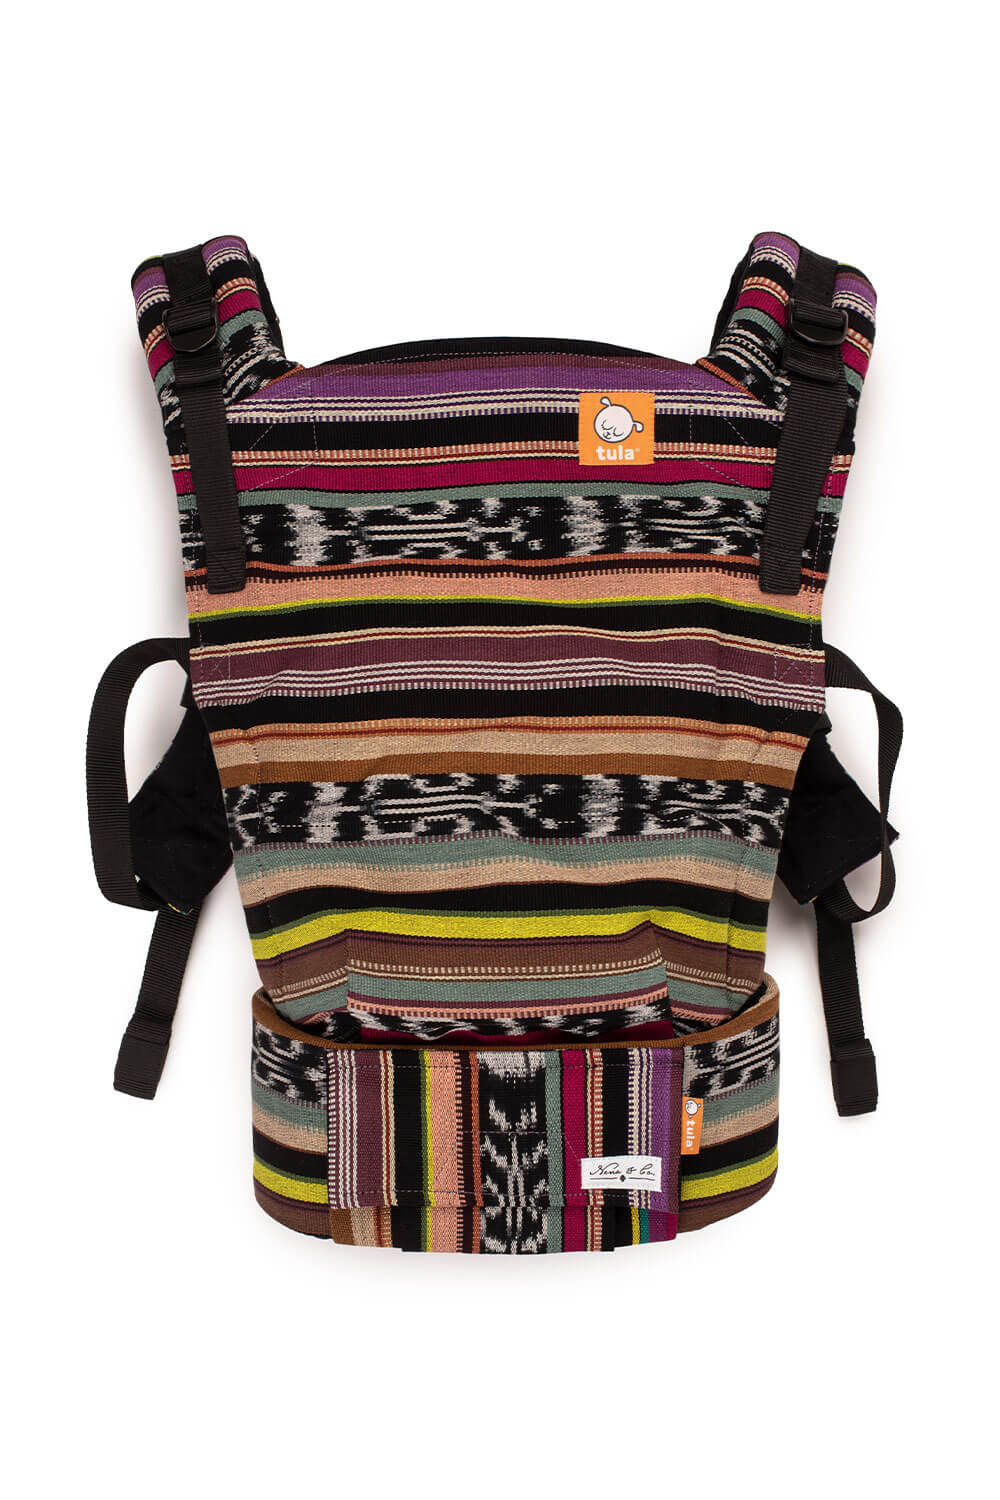 Moonlight Orchid - Signature Woven Free-to-Grow Baby Carrier